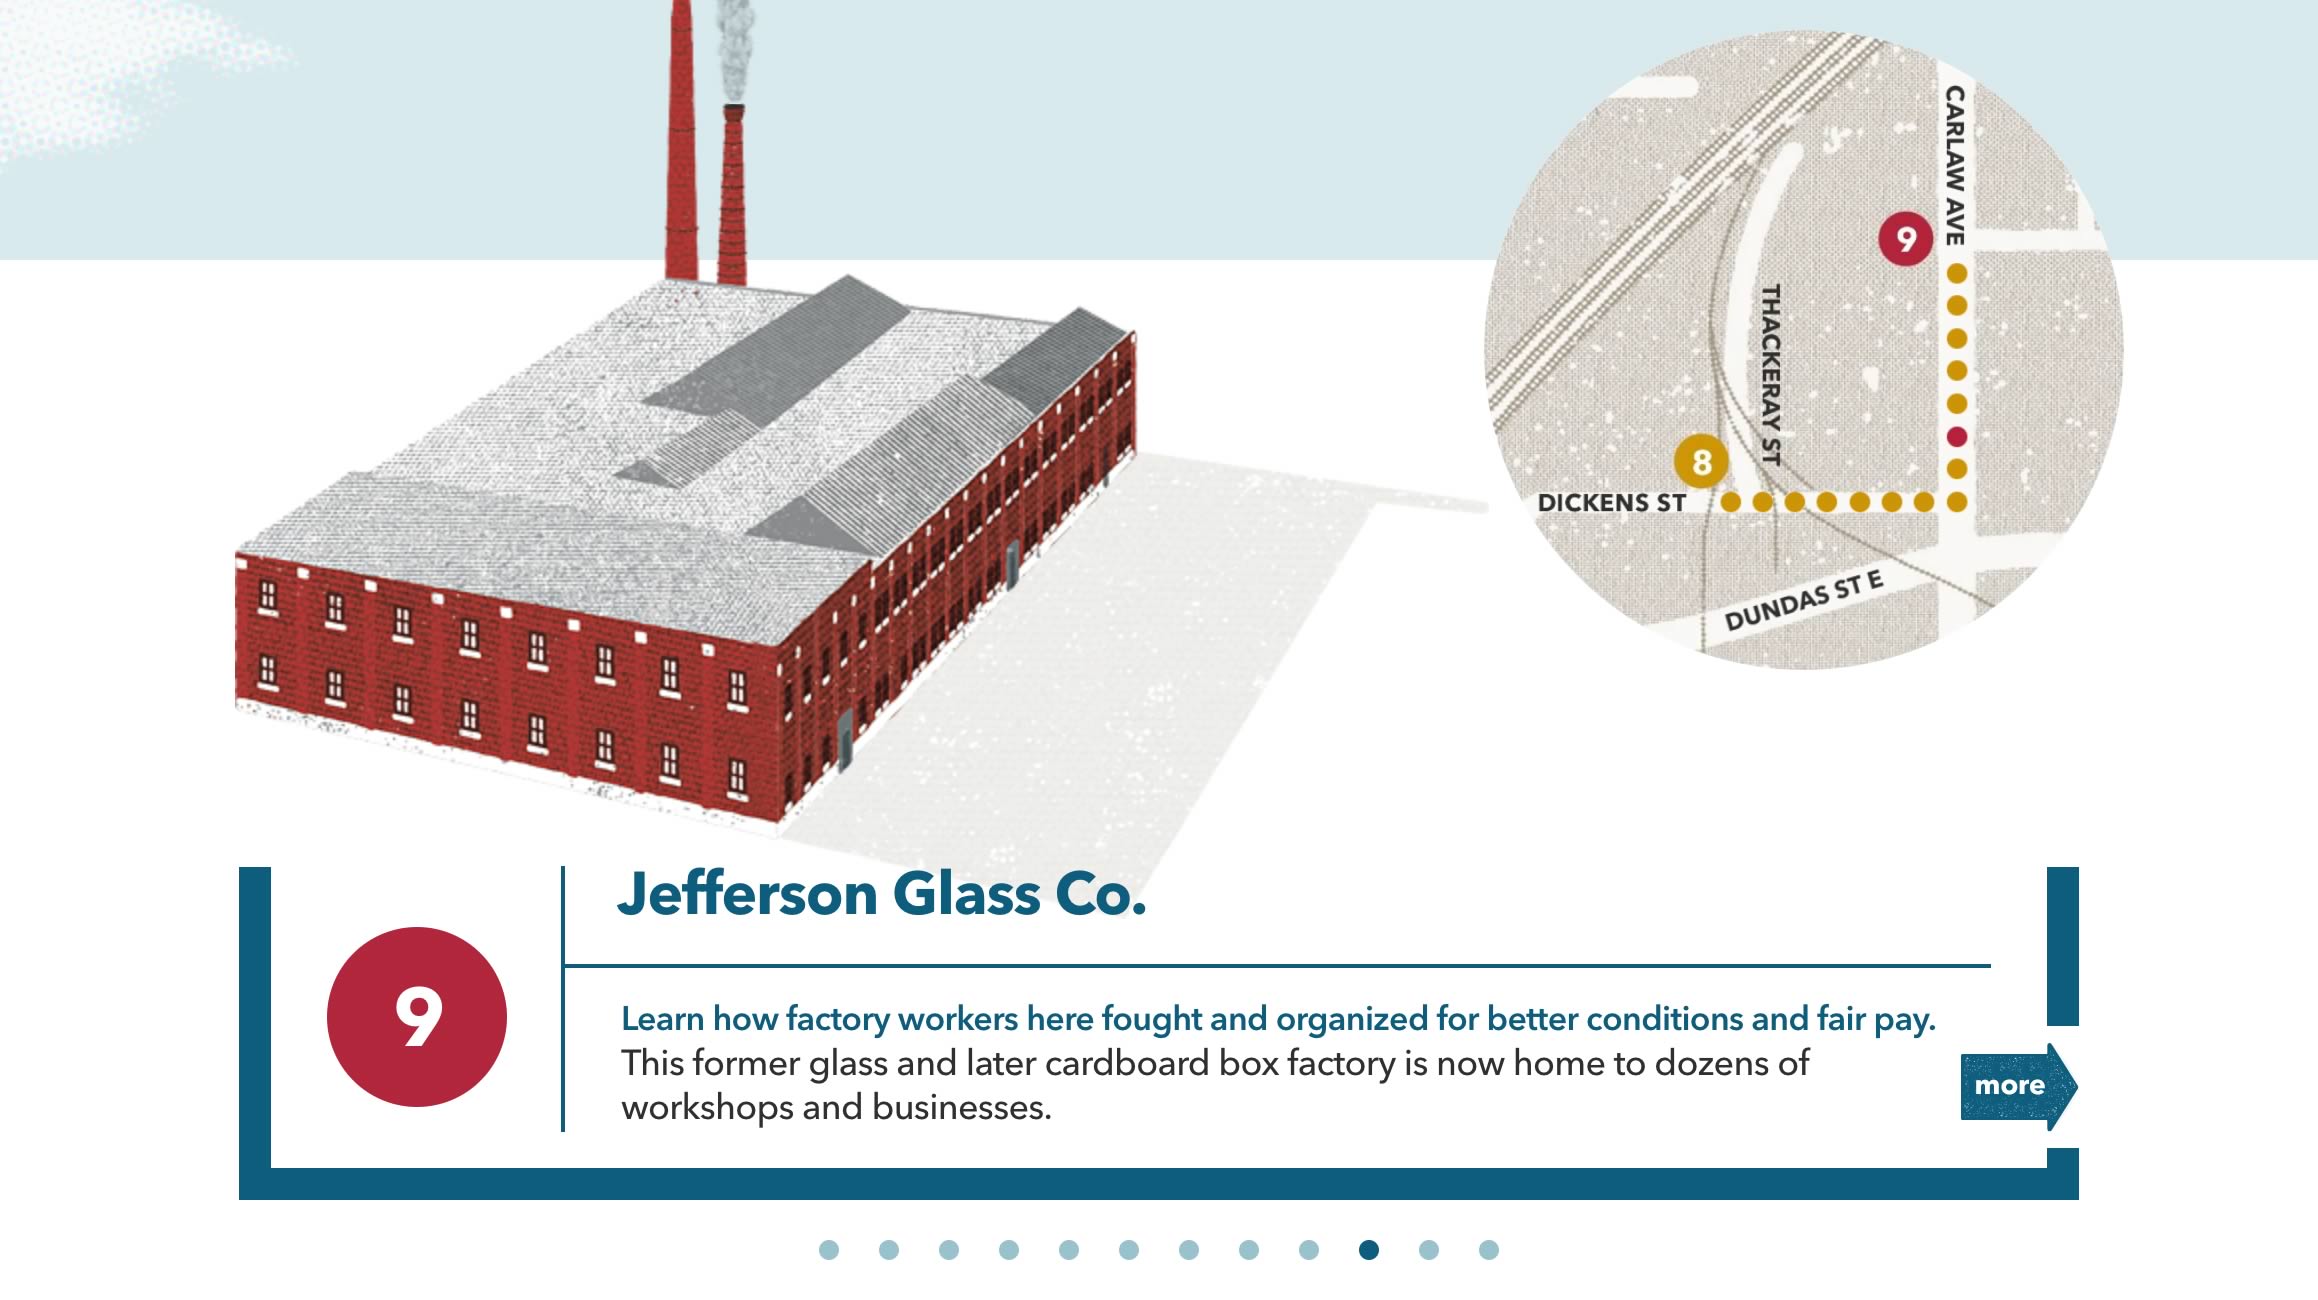 Capture of the homepage tour navigation modal window from the Made in Toronto tour/website ('Jefferson Glass Co.' stop displayed)